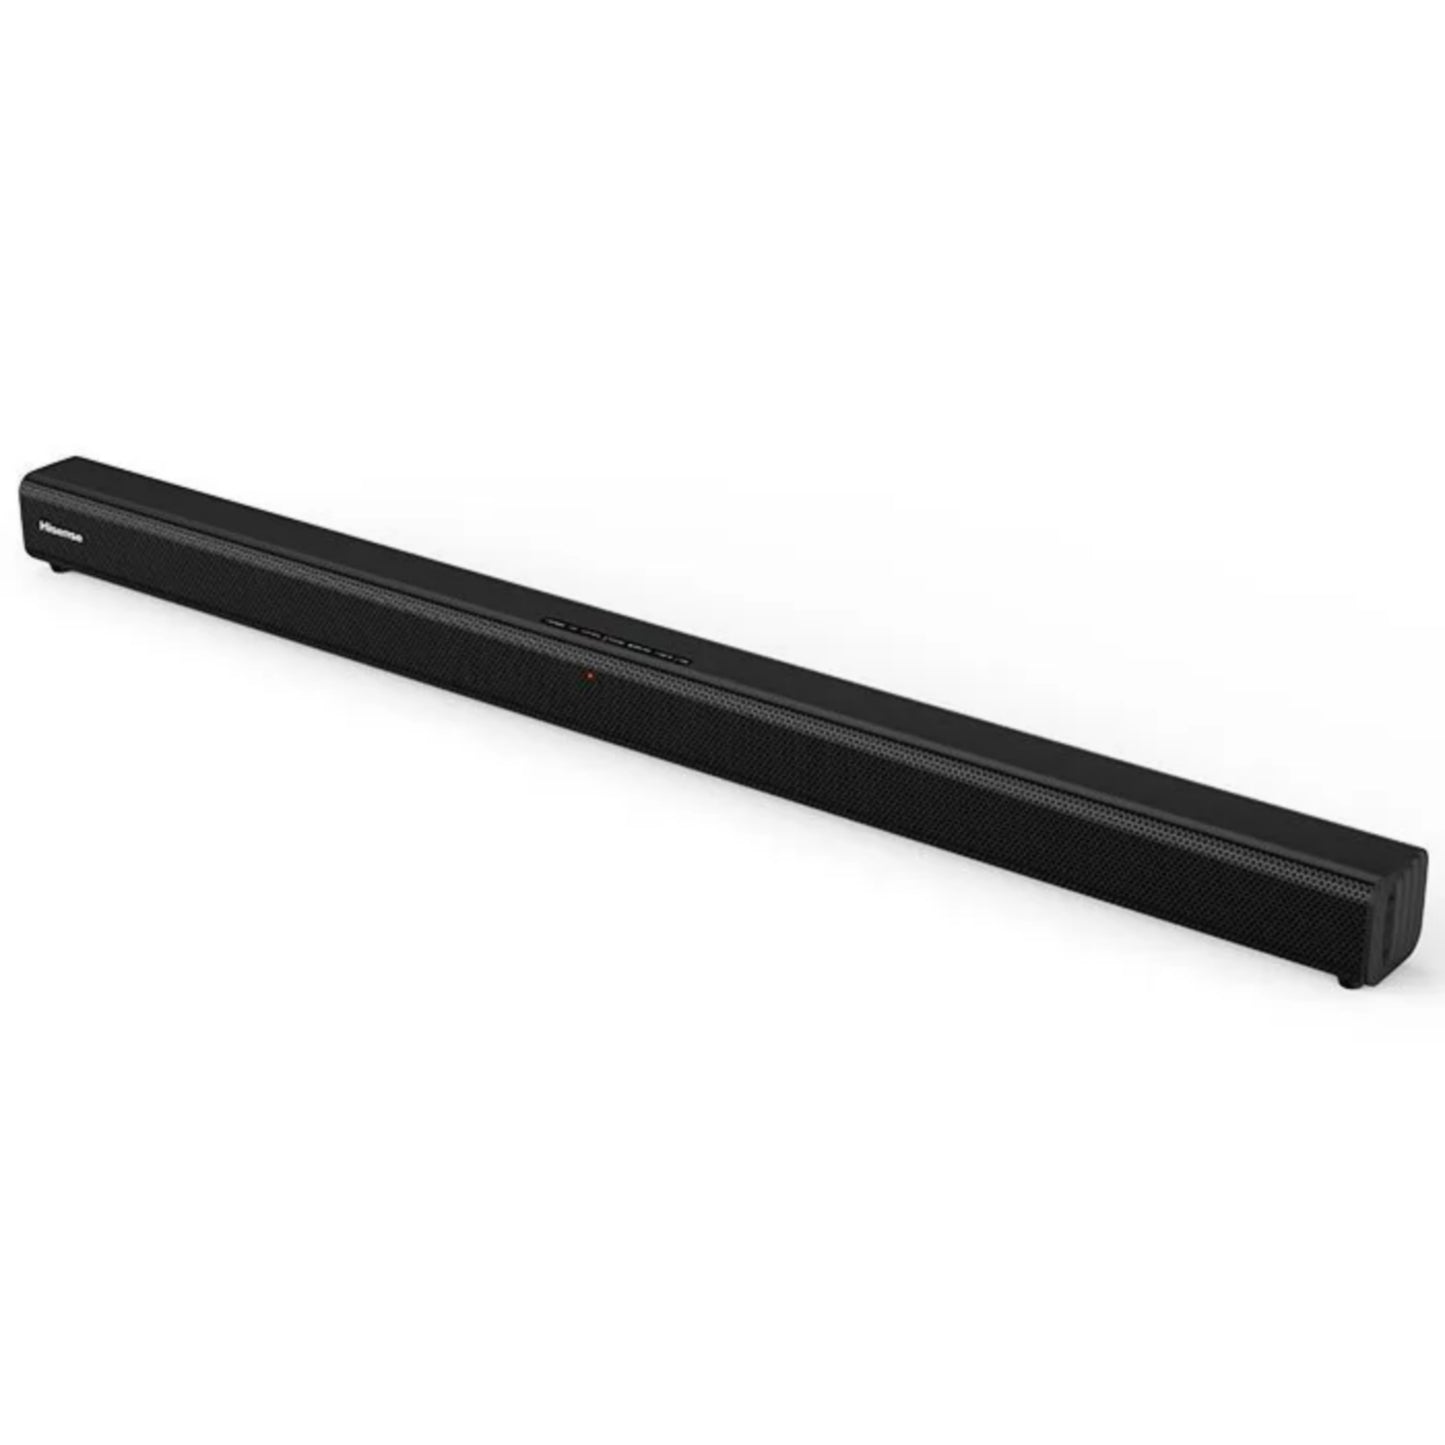 Hisense HS205 2.0Ch 60Watts Bluetooth Sound Bar With USB, Optical in and Port in